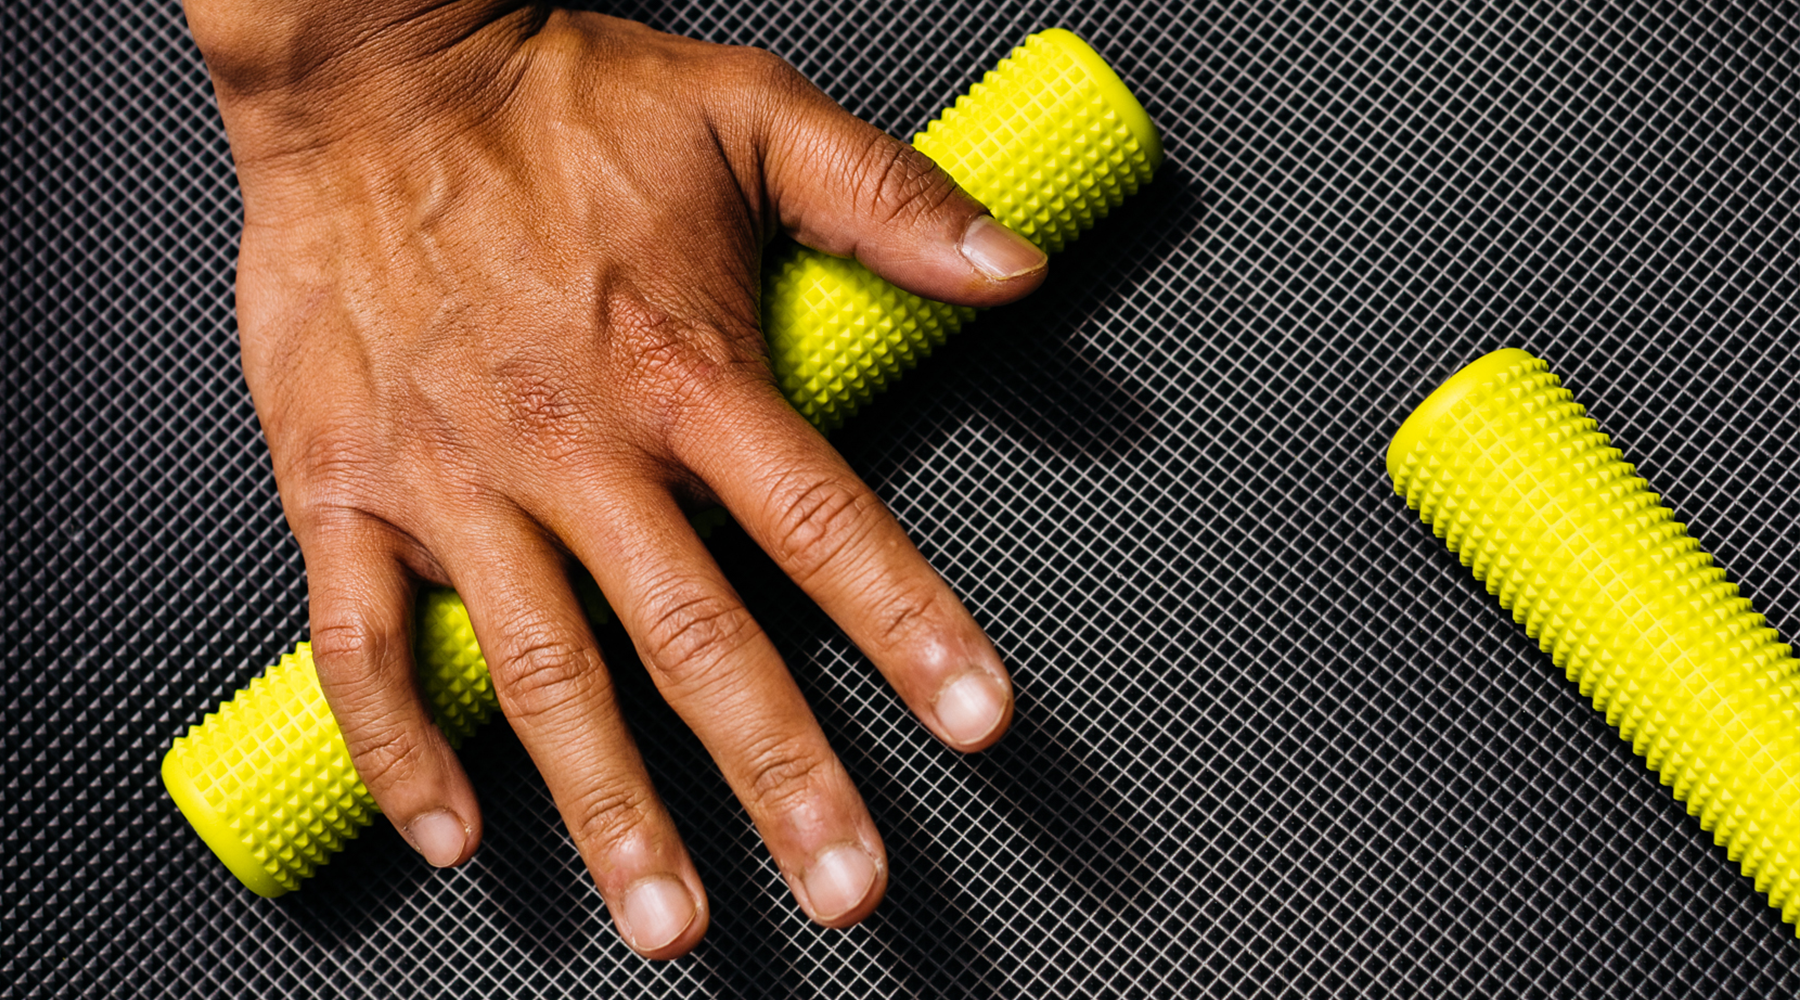 Tips for strong hands and grip strength